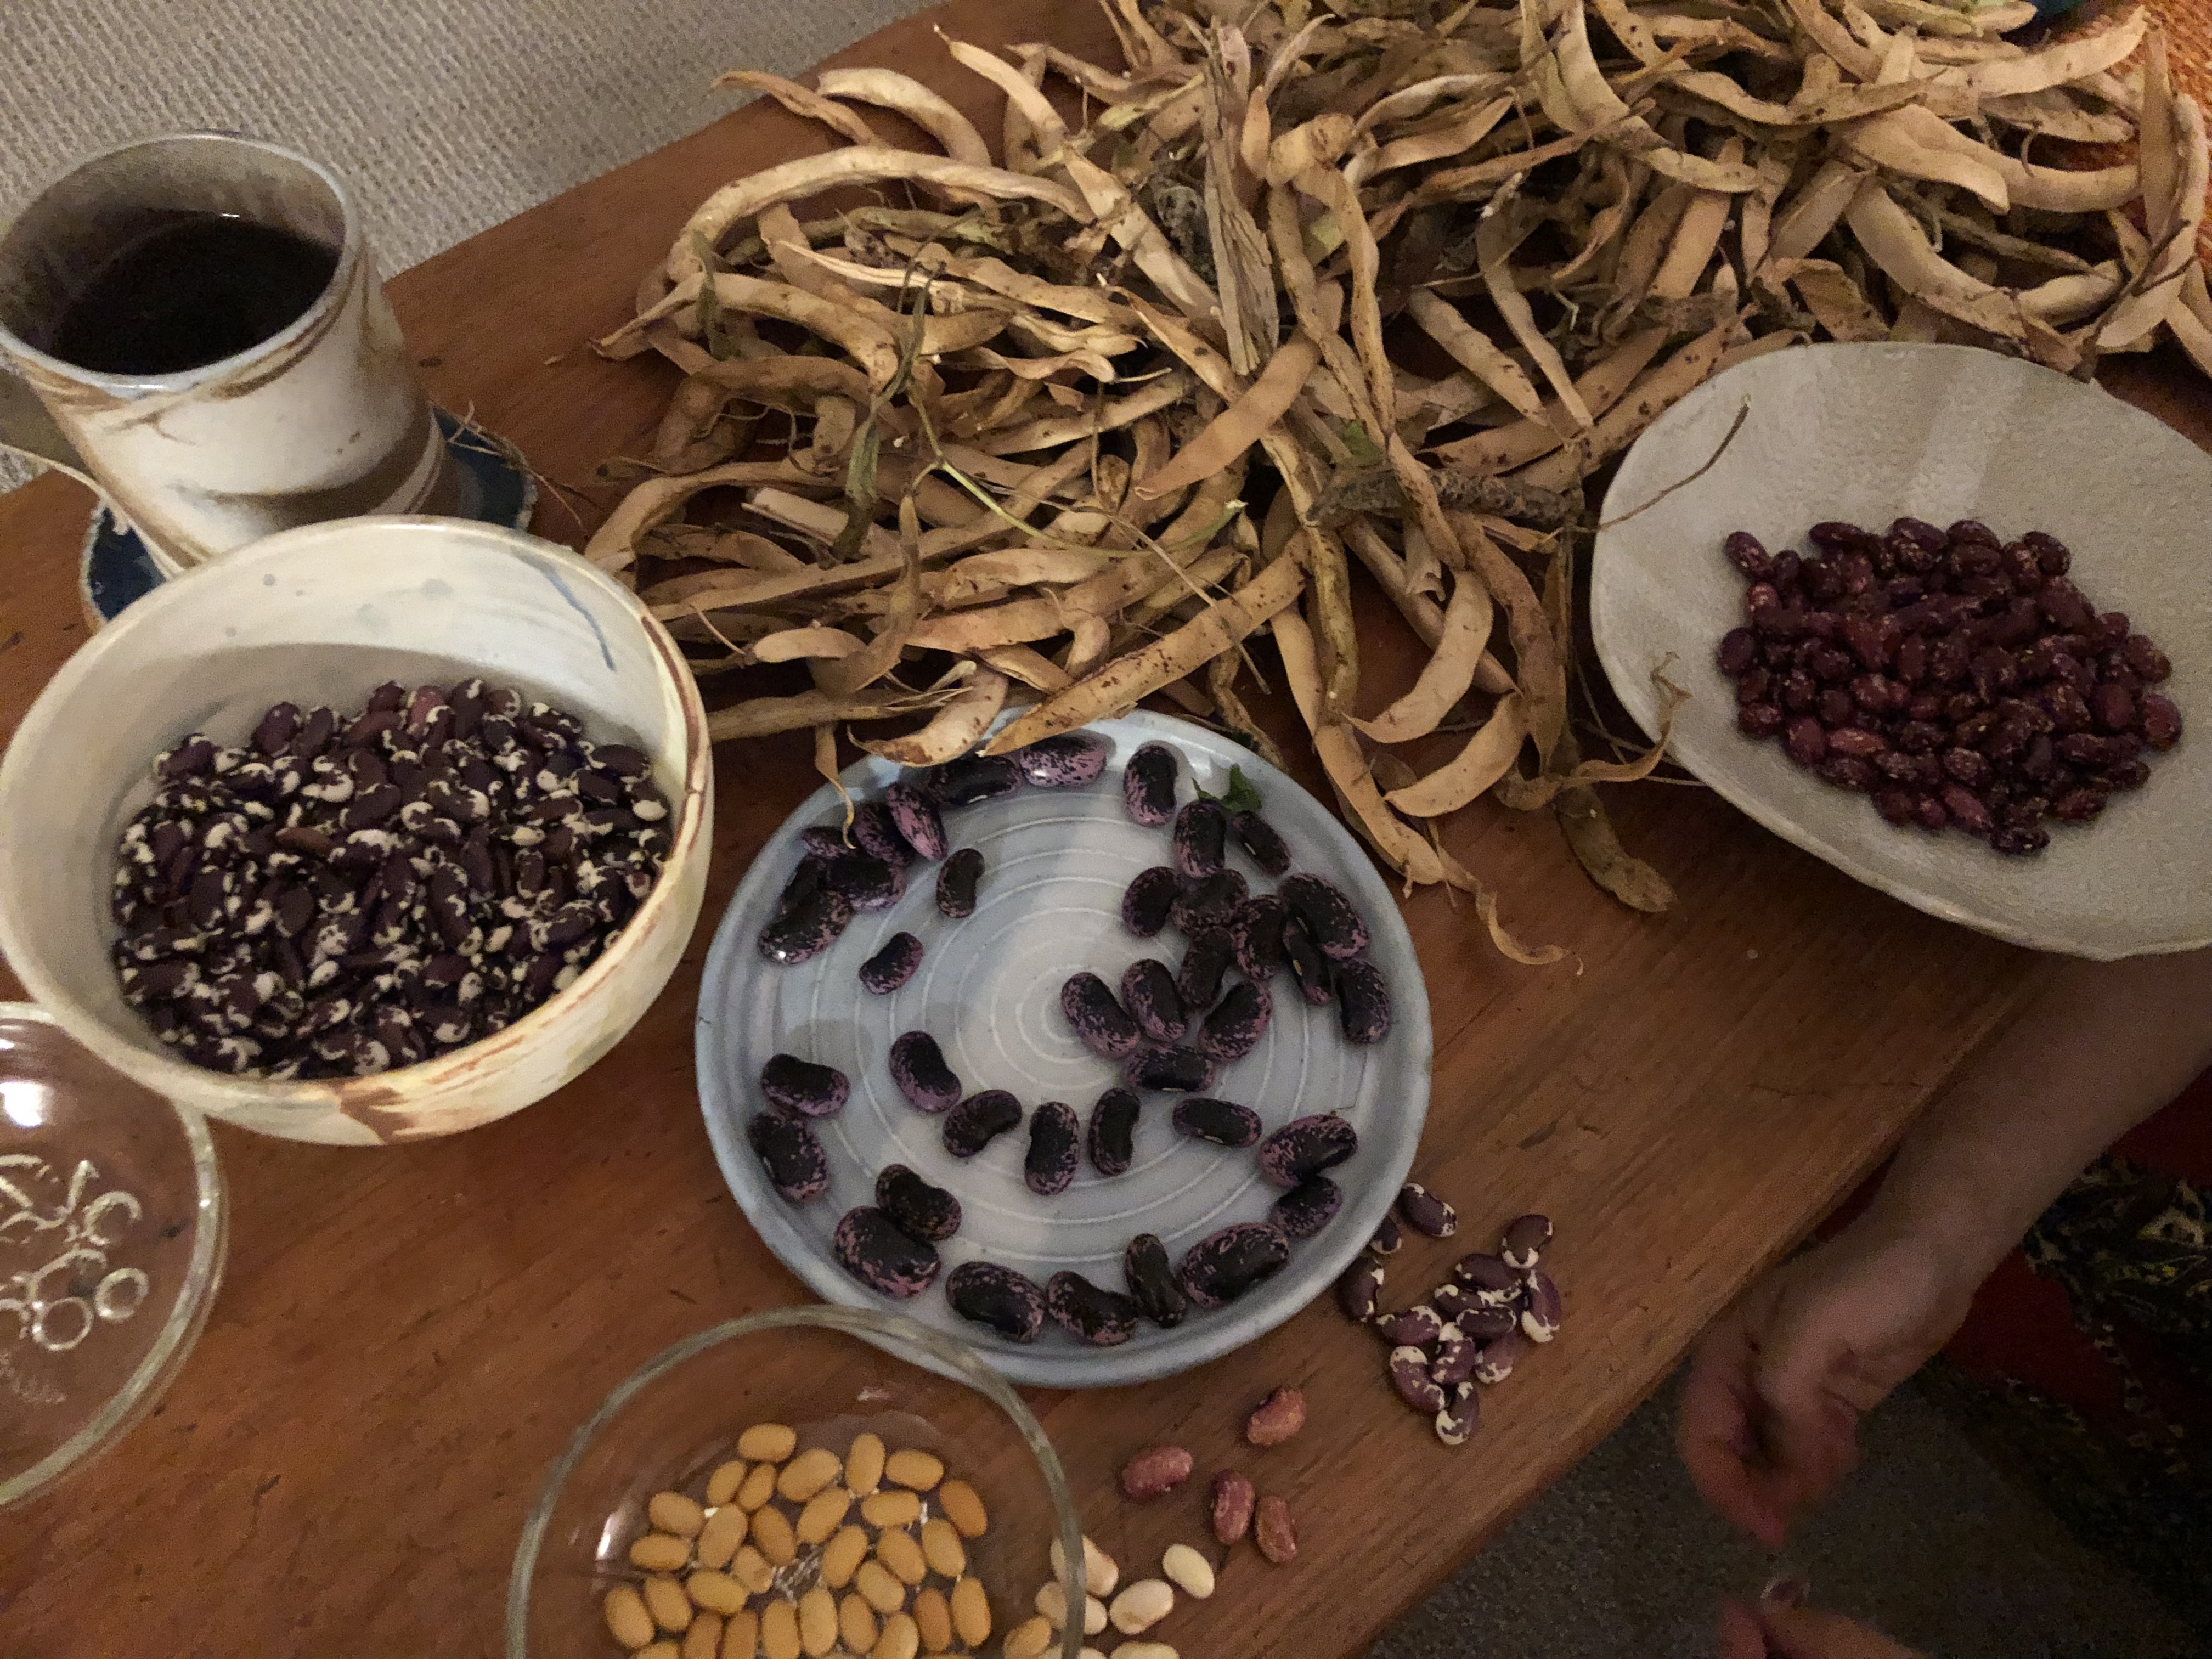 Sorting dry beans on the coffee table: Anasazi Cave Beans, Scarlet Runner Beans, Madeira Maroon Beans, Hopi Yellow Beans. 